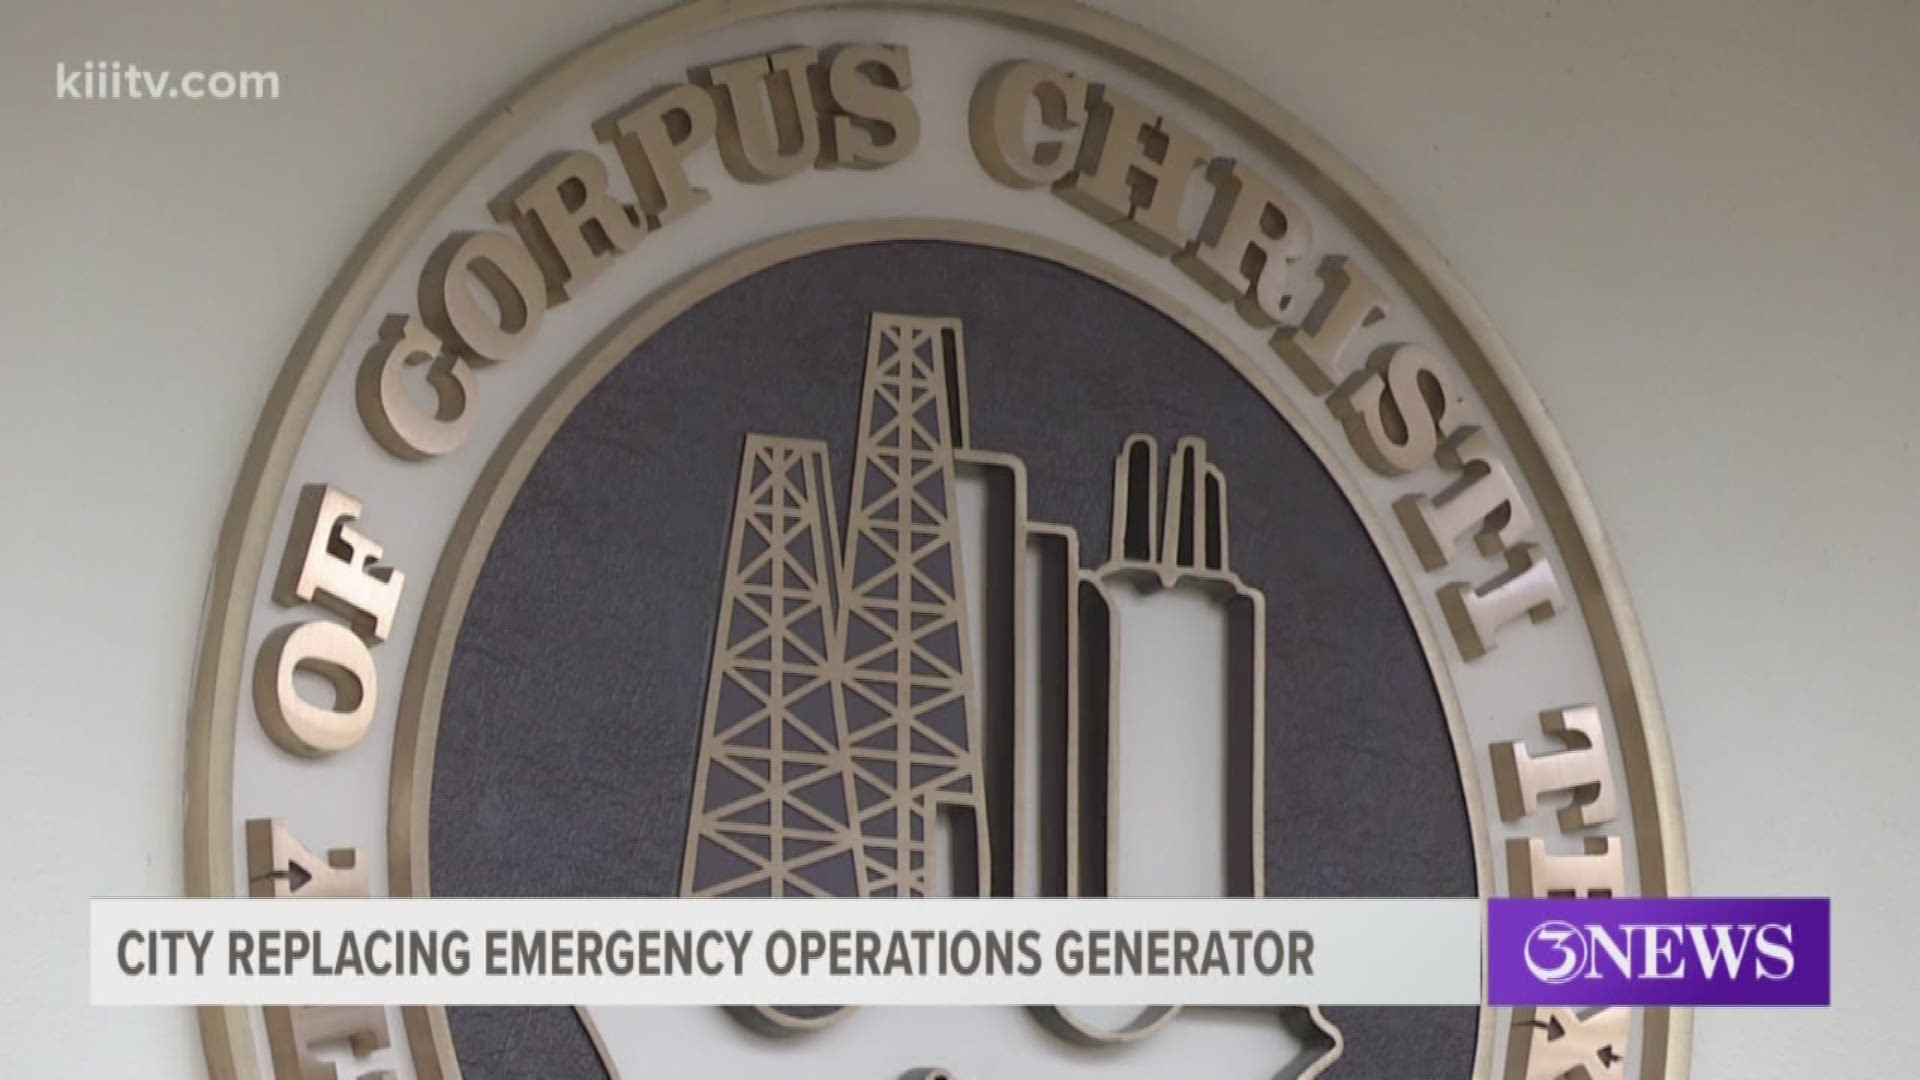 Those in charge of the City's Emergency Operations Center have finally gotten approval for a new emergency generator. The one they had actually broke down during Hurricane Harvey in 2017, forcing everyone to relocate during the storm.